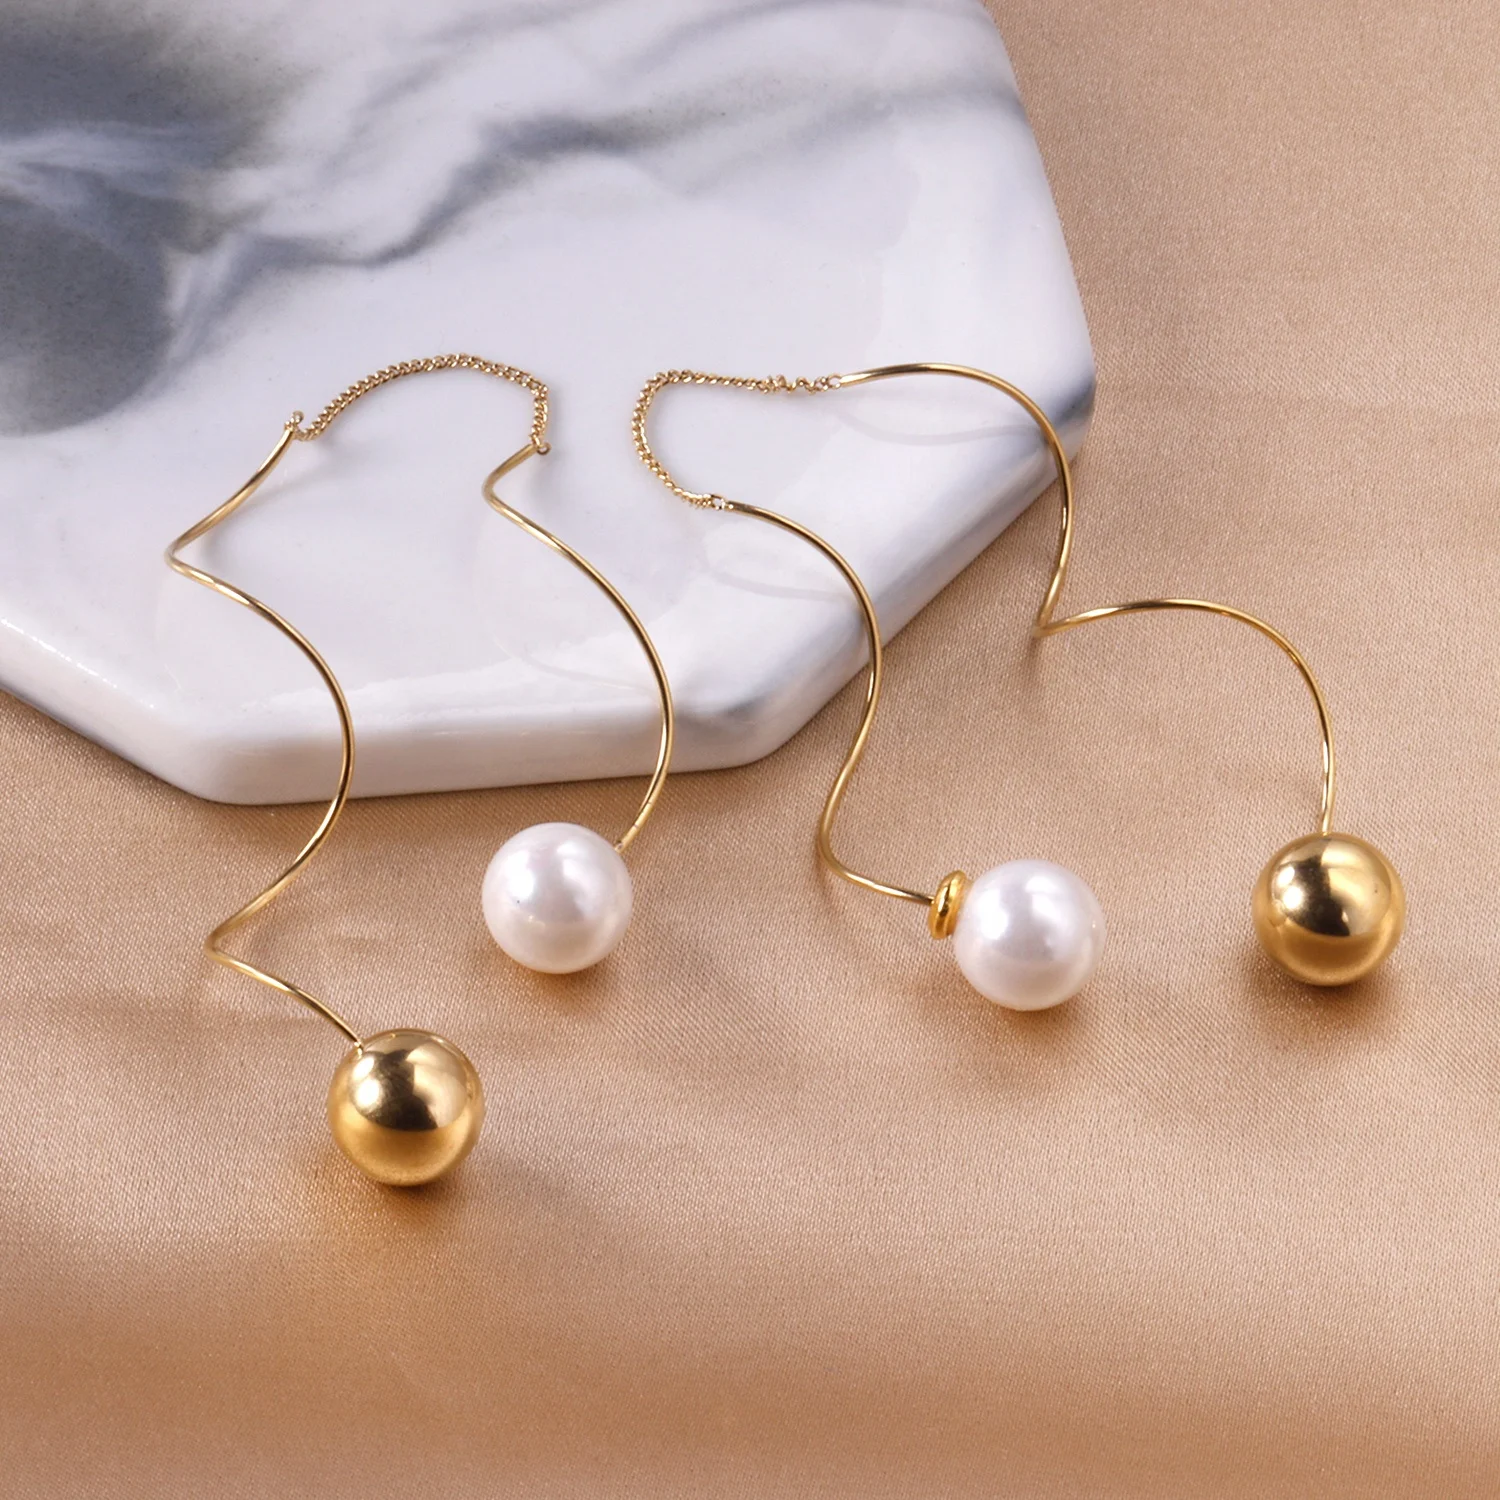 

Fashion Earrings Trend 2021 Stainless Steel 24K Gold Plated Drop Jewelry Pearl Earrings For Girls Ladies Women, Gold/silver/rose/black available